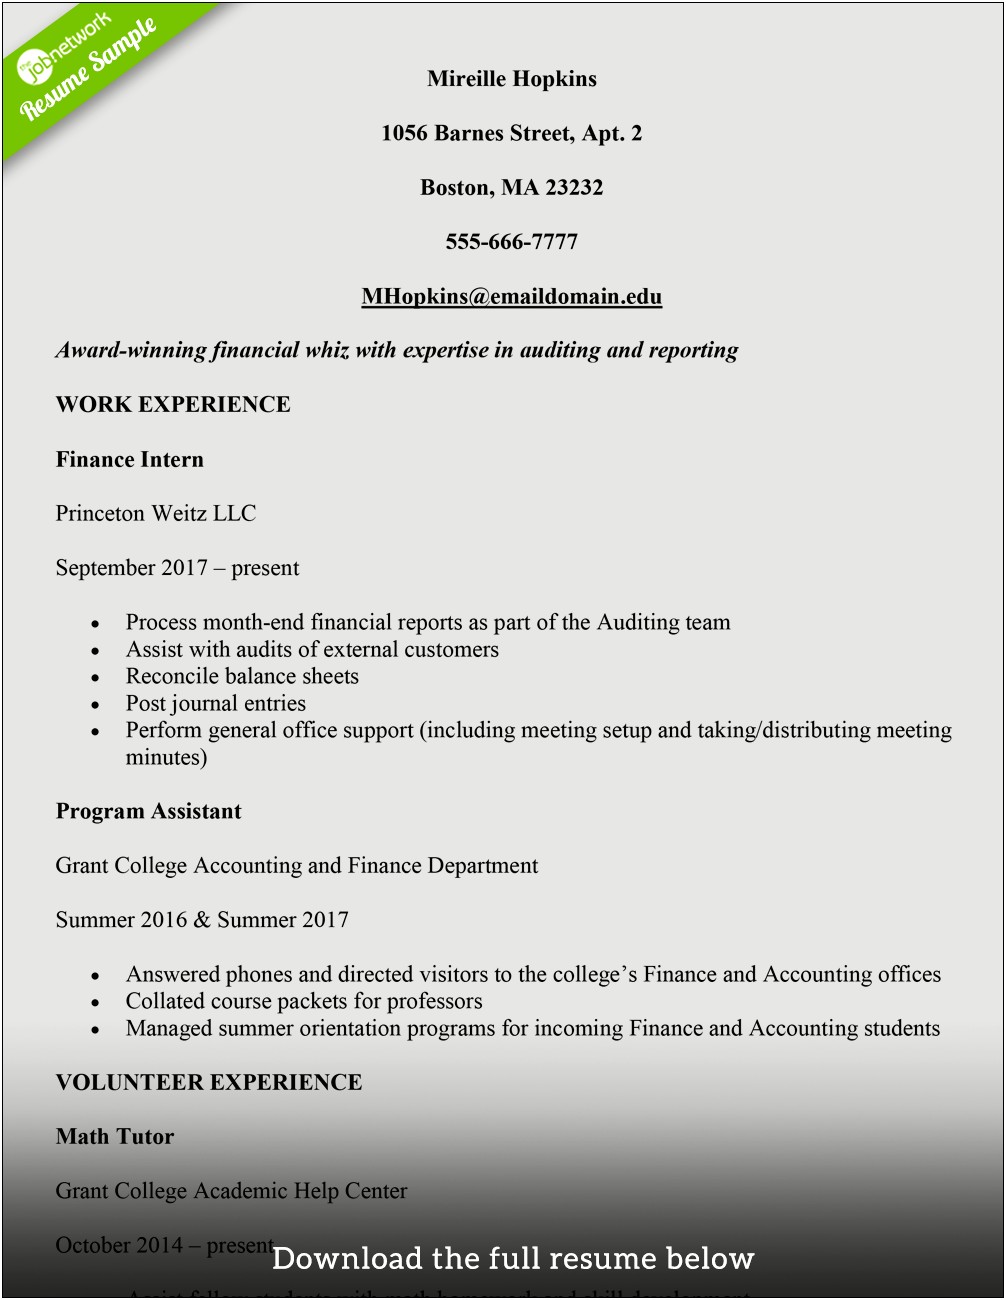 Good Resume Examples For First Job